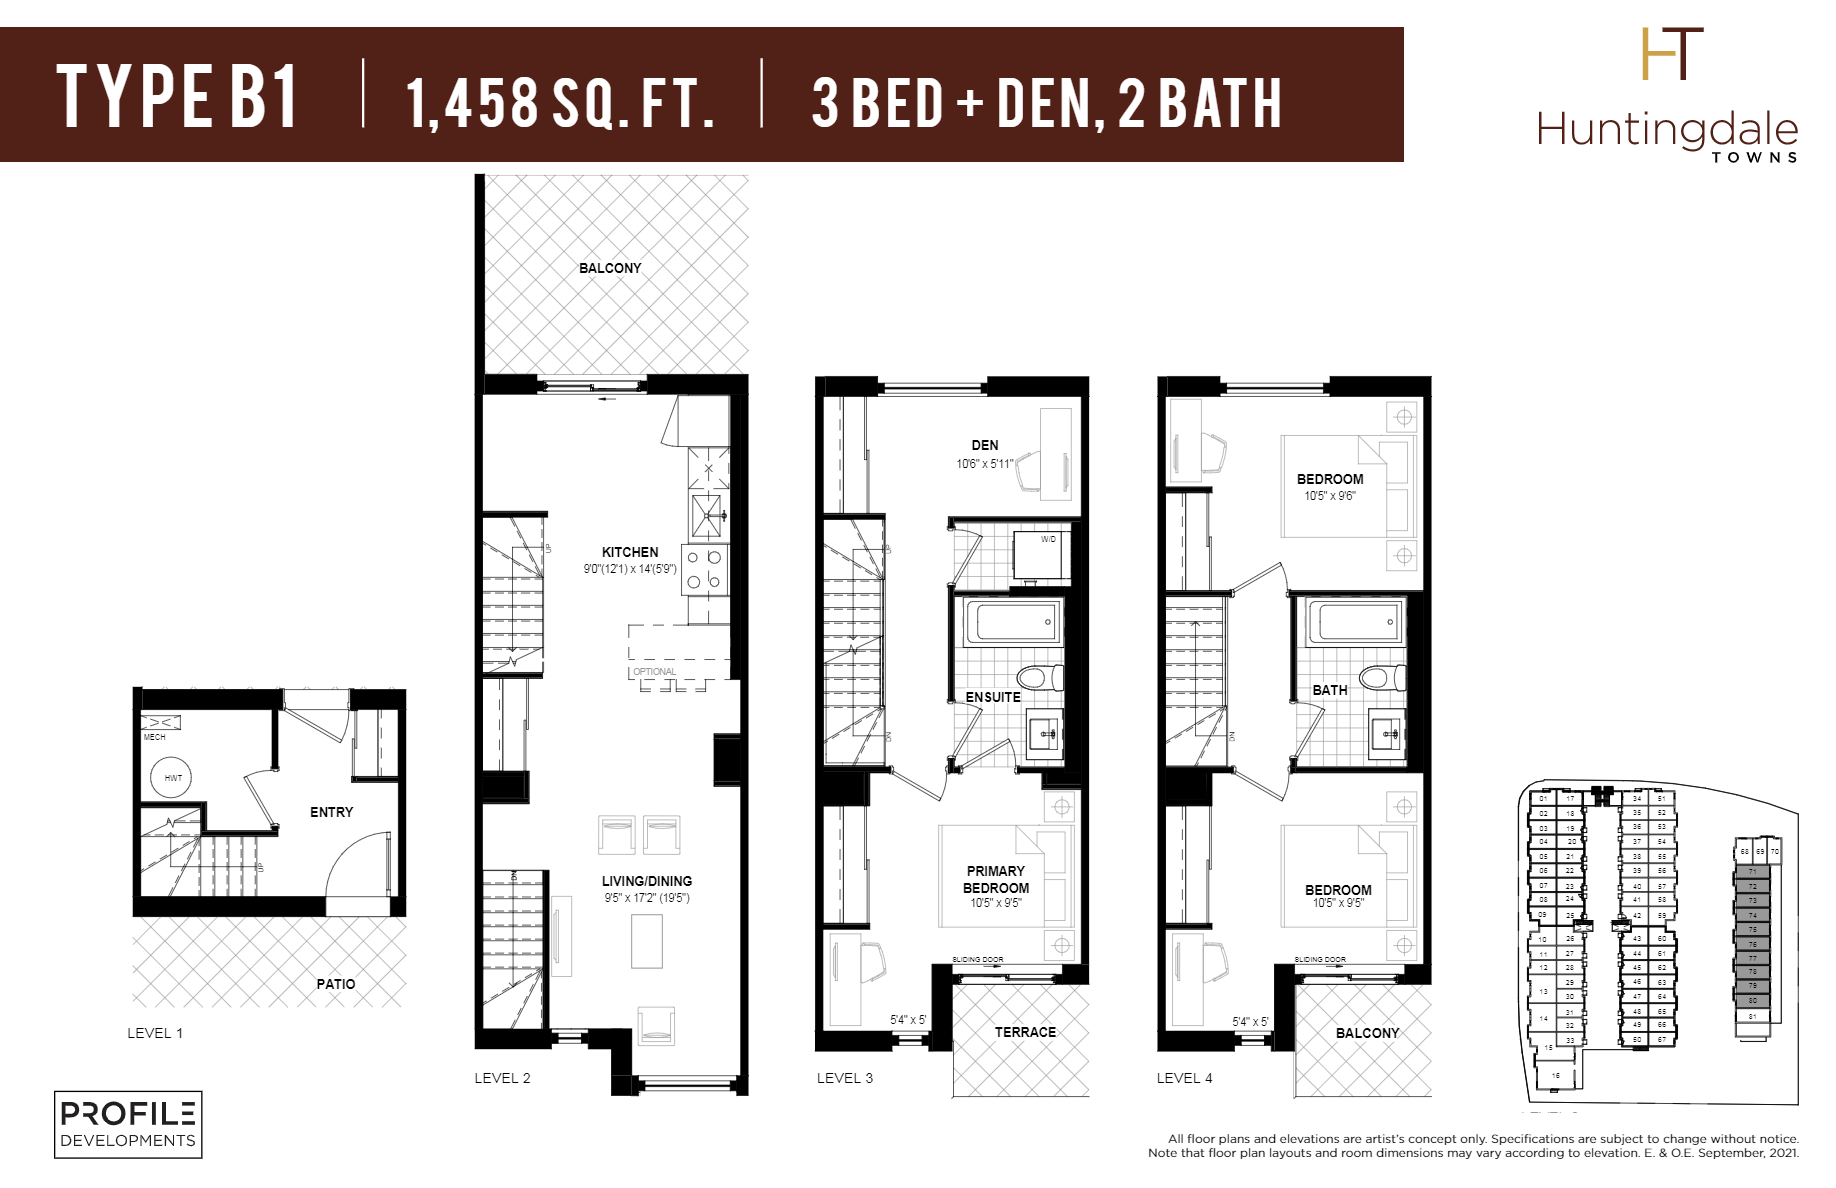  Type B1  Floor Plan of Huntingdale Towns Scarborough with undefined beds